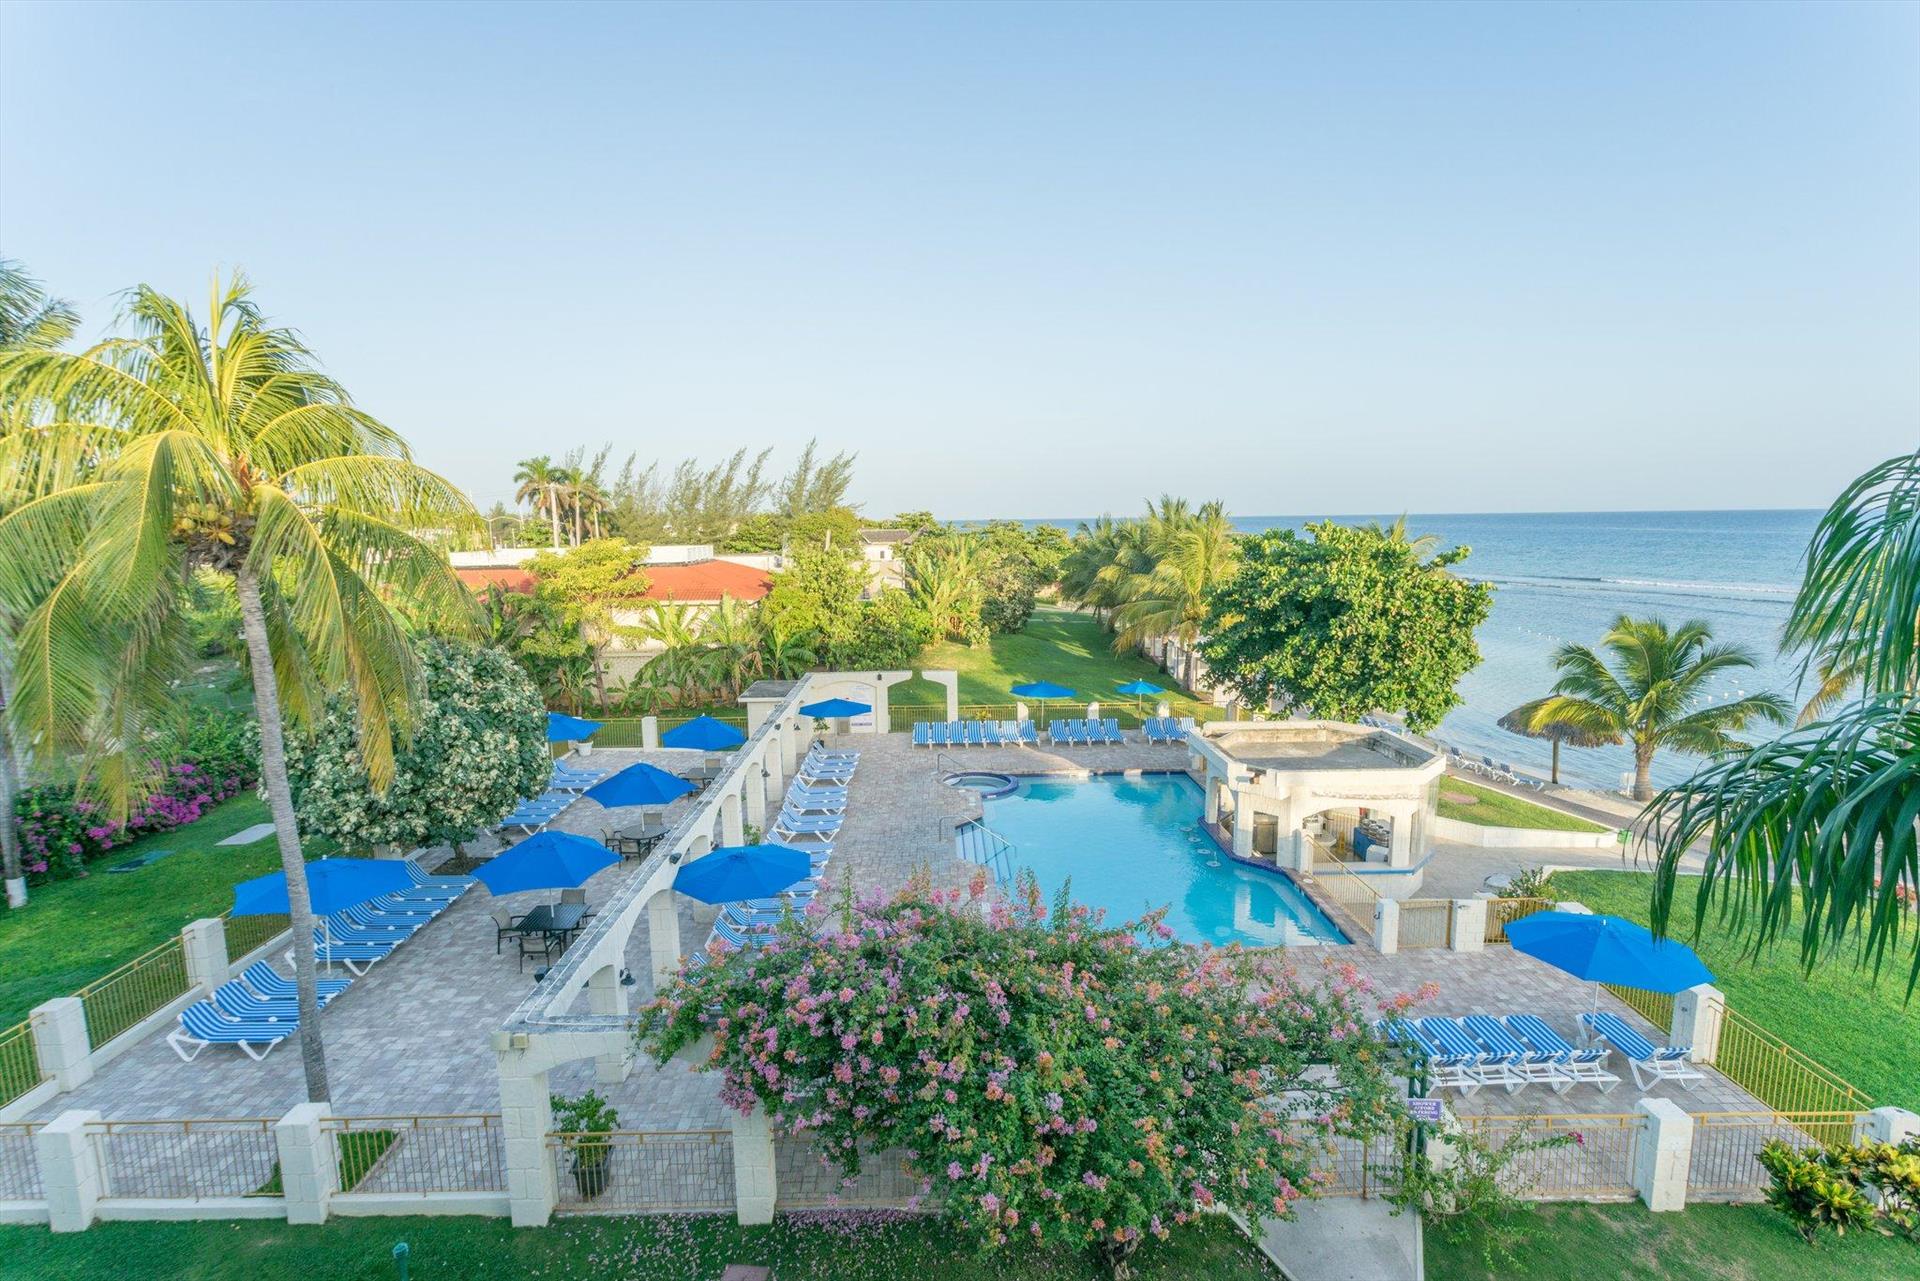 In Montego Bay, Jamaica, a New Kind of All-Inclusive Vacation